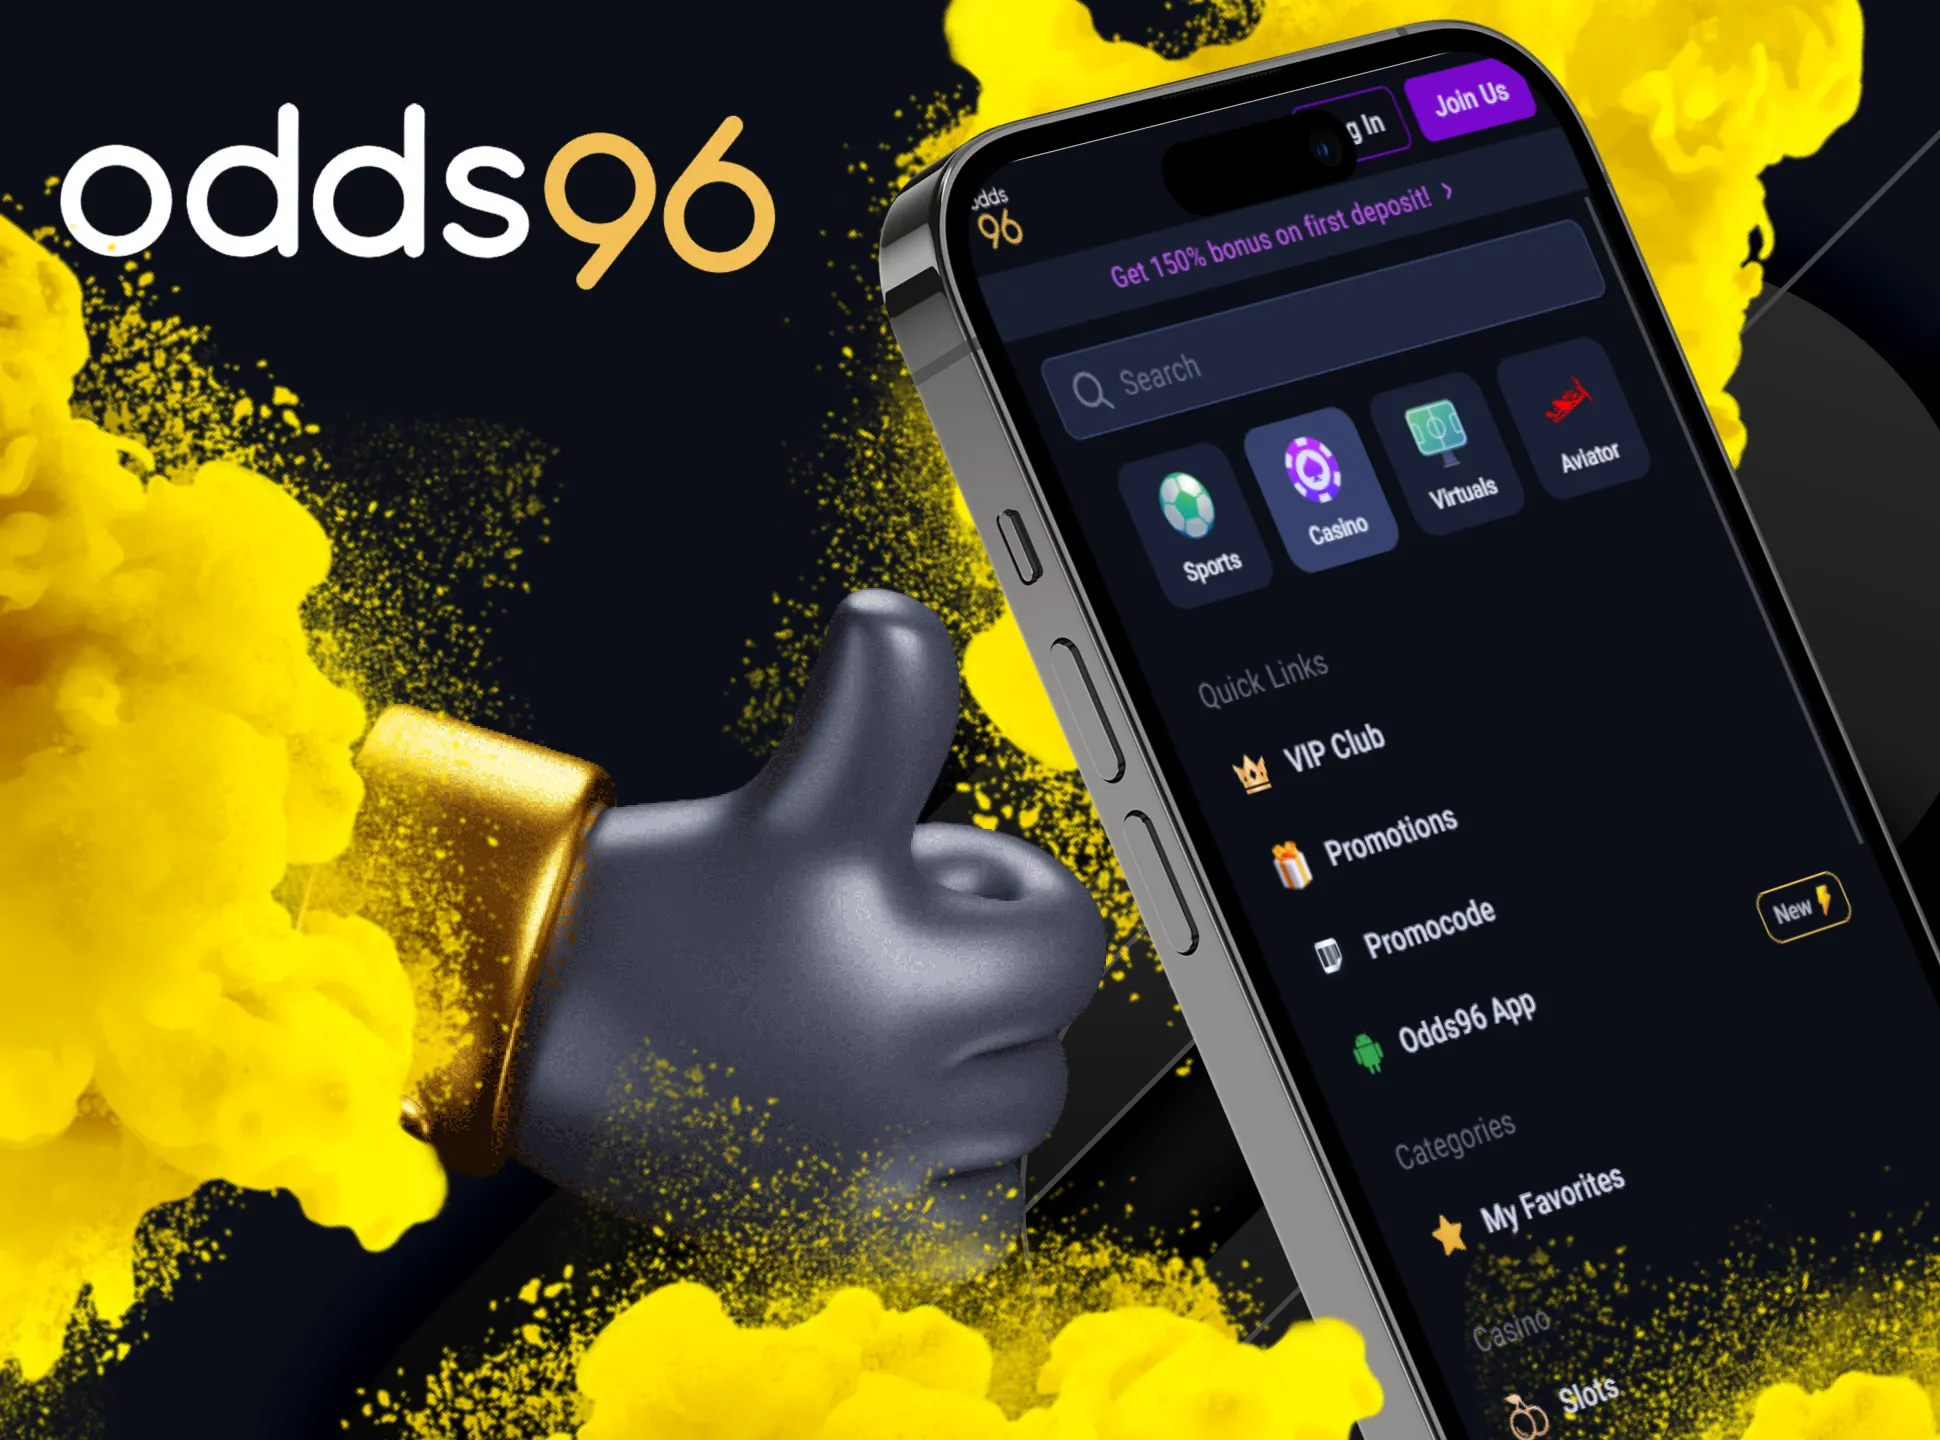 Odds96 app is great option for convinient betting.